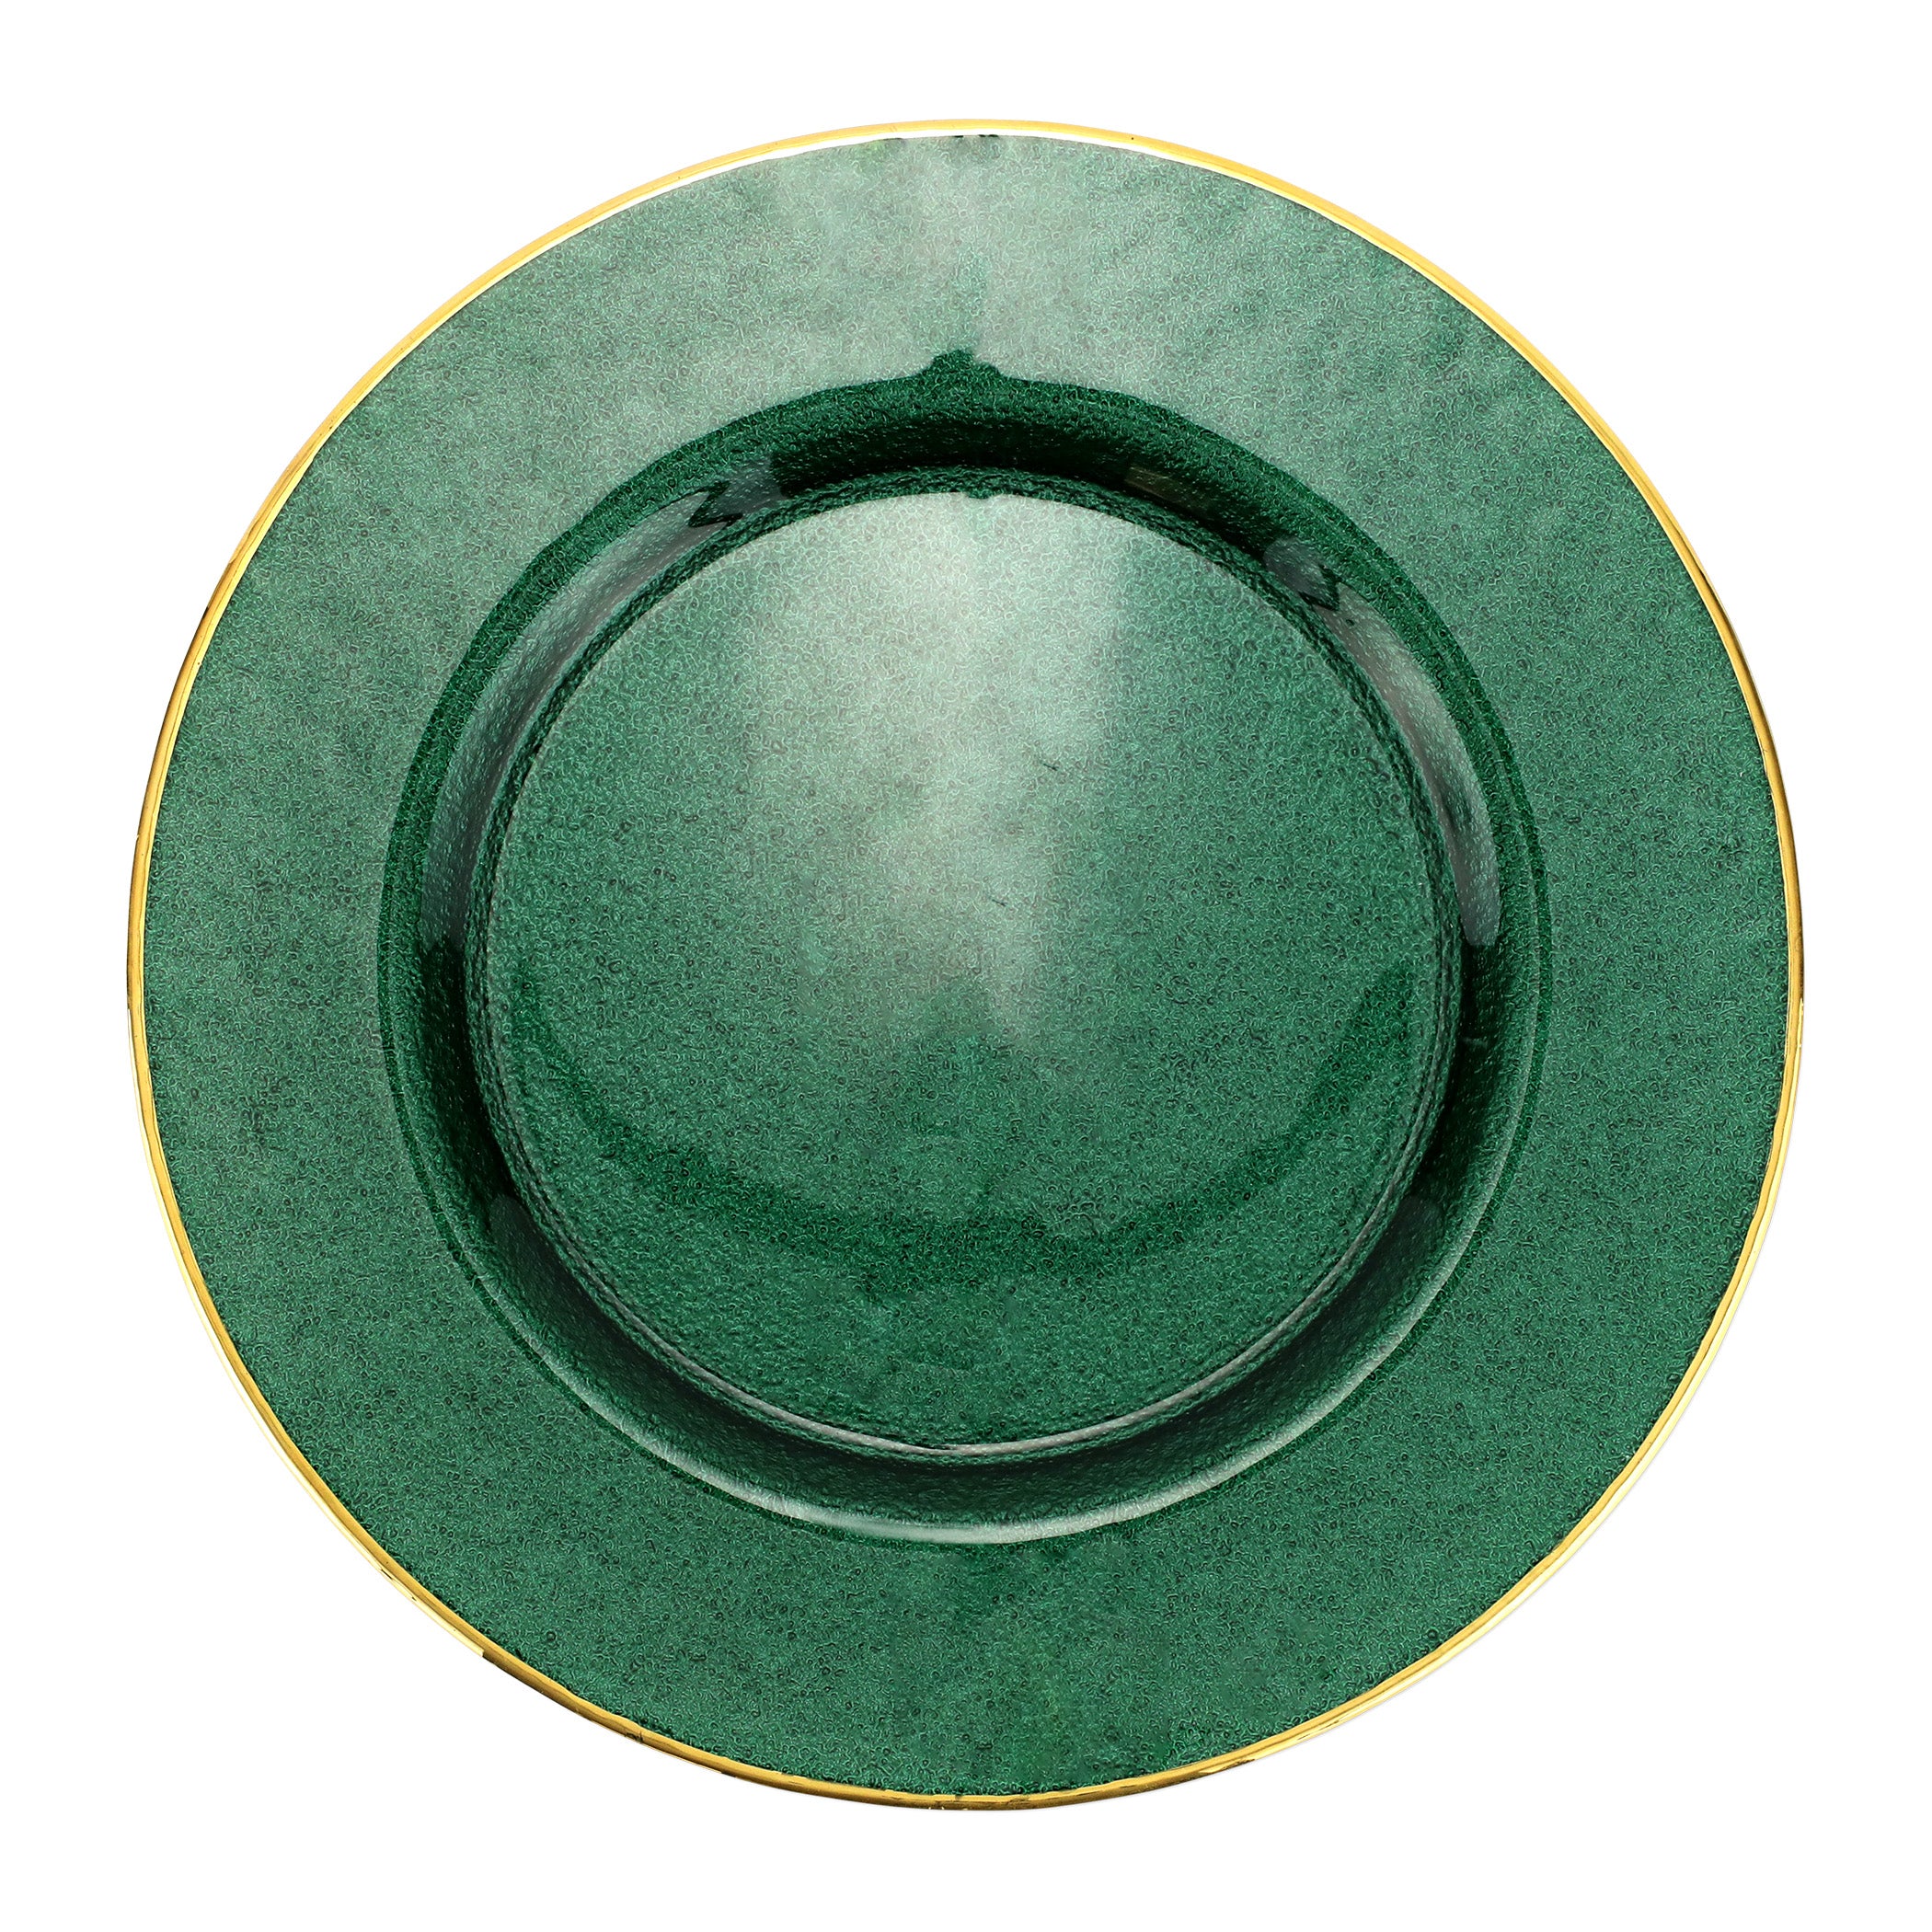 Metallic Glass Emerald Service Plate/Charger